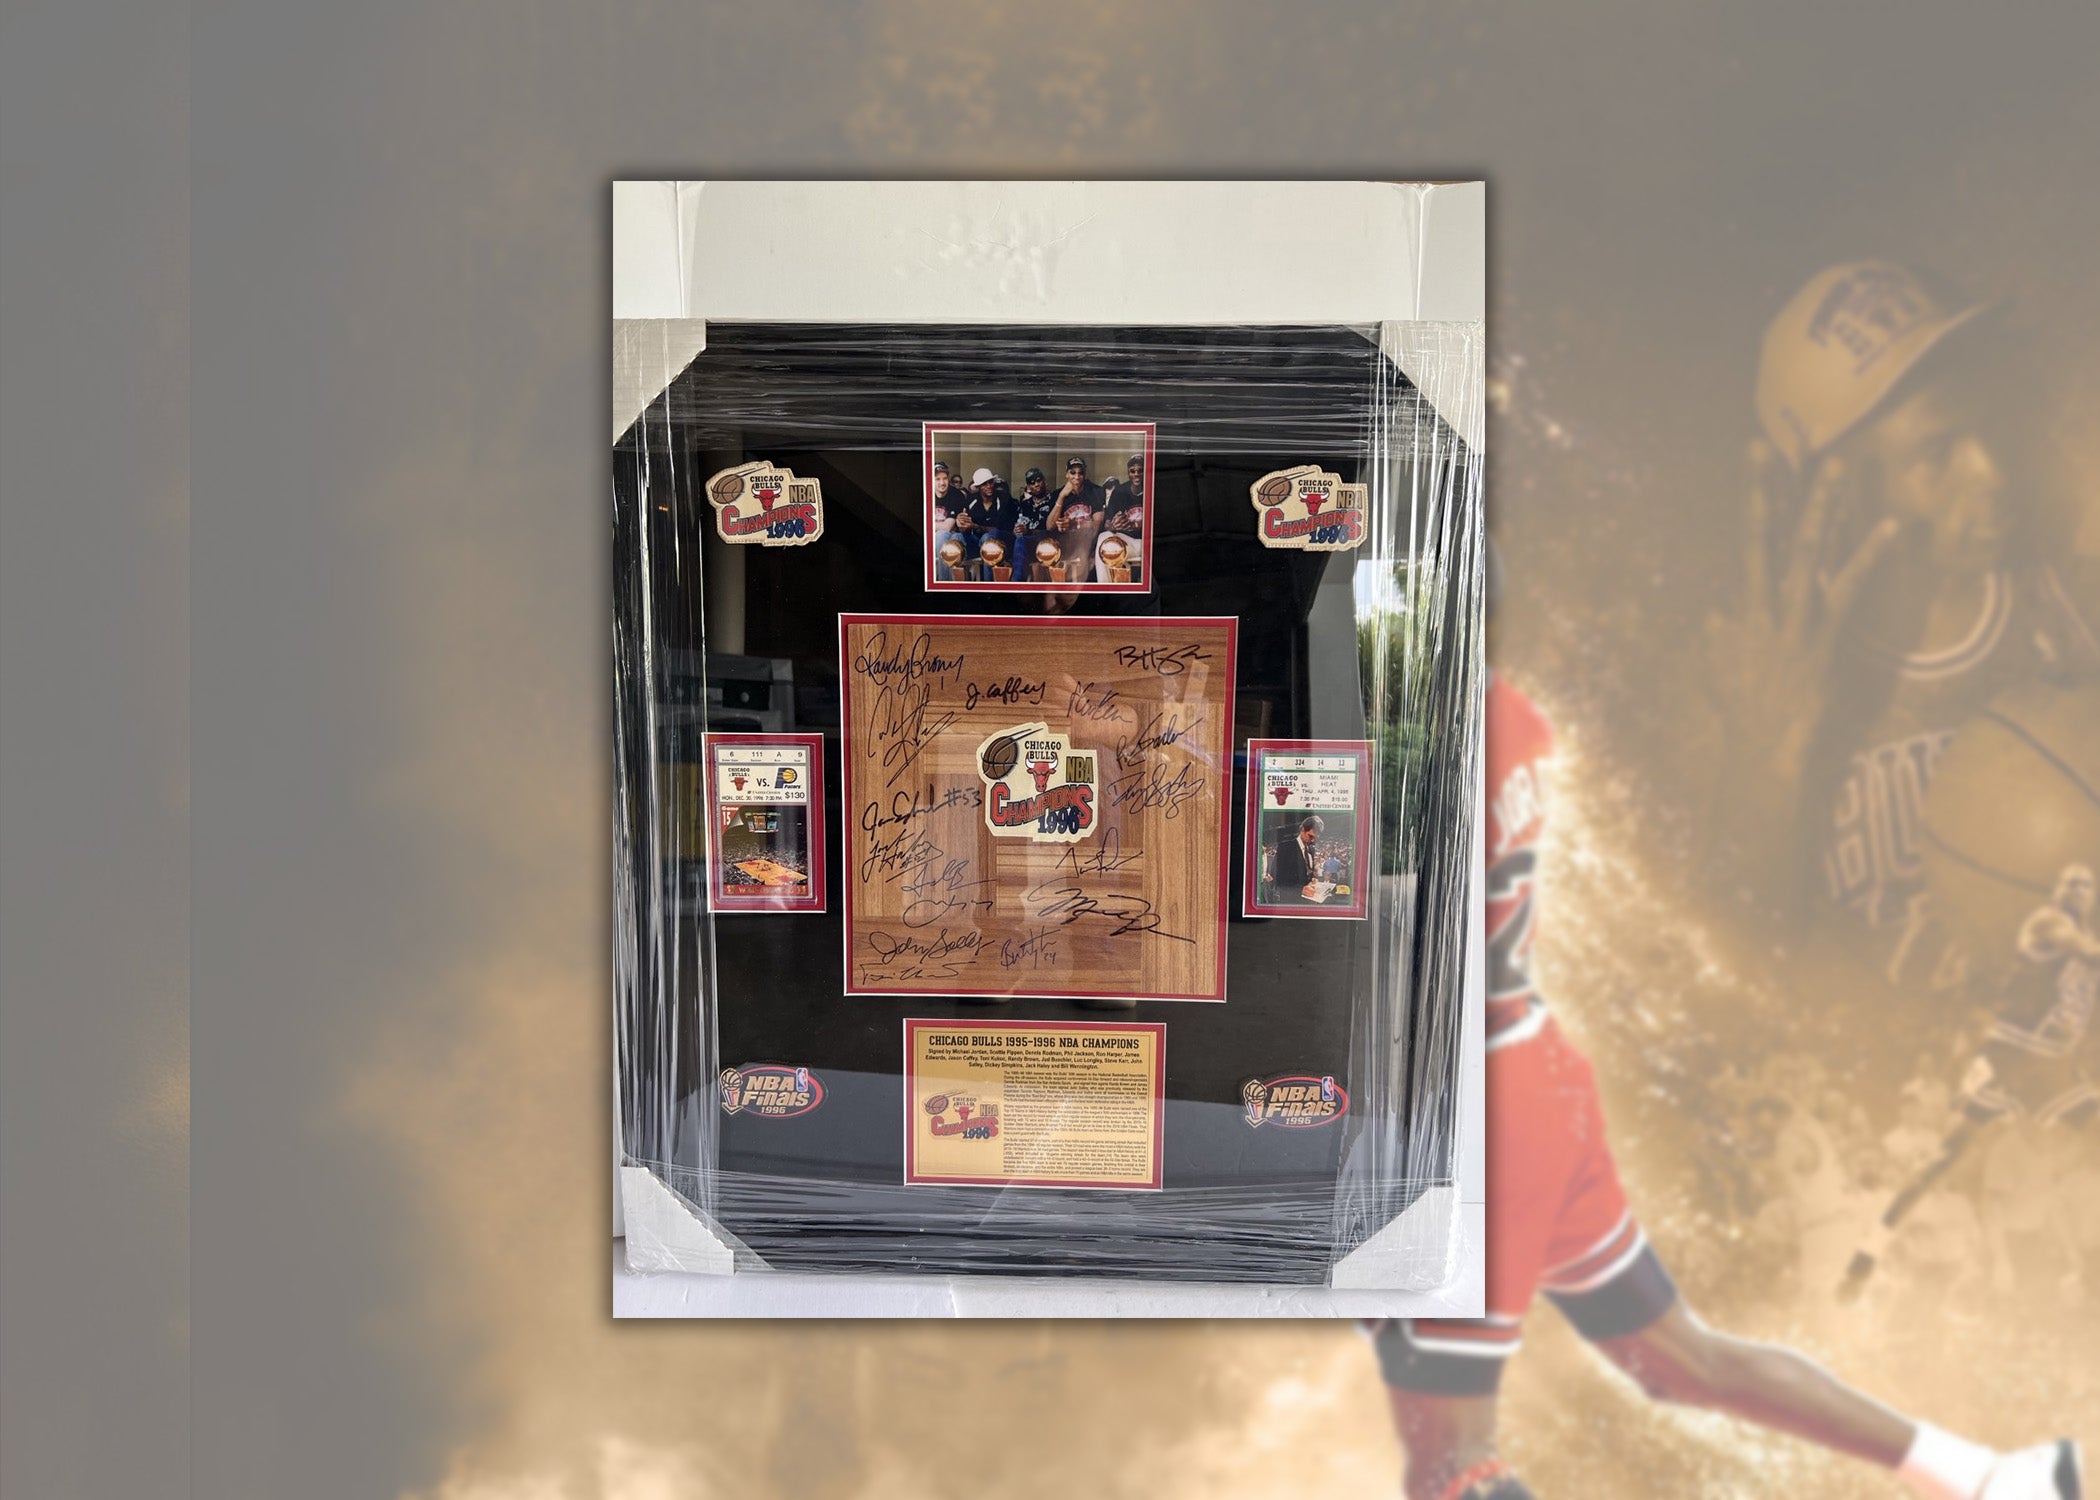 Michael Jordan, Scottie Pippen, Dennis Rodman, Phil Jackson 1995-96 Chicago Bulls team signed parque wood floor signed and framed with proof